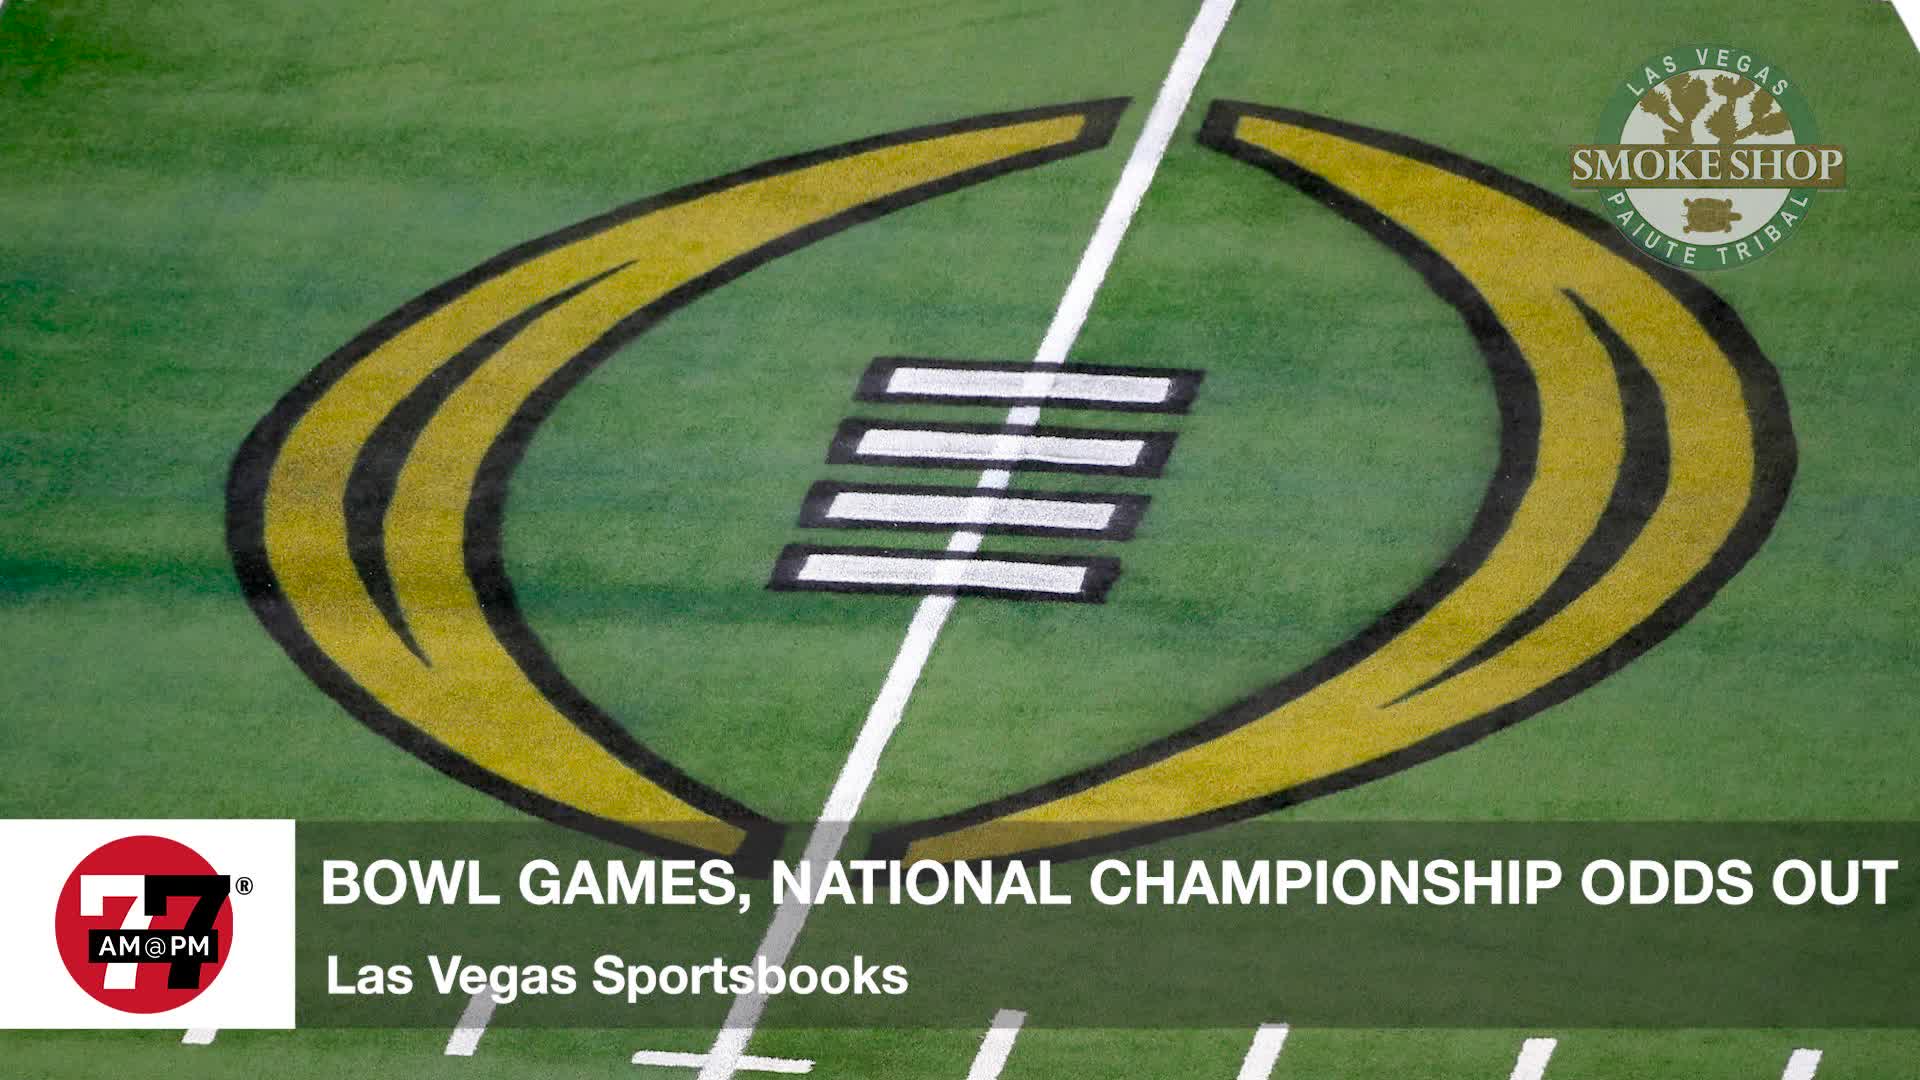 Bowl games and National Championship odds out